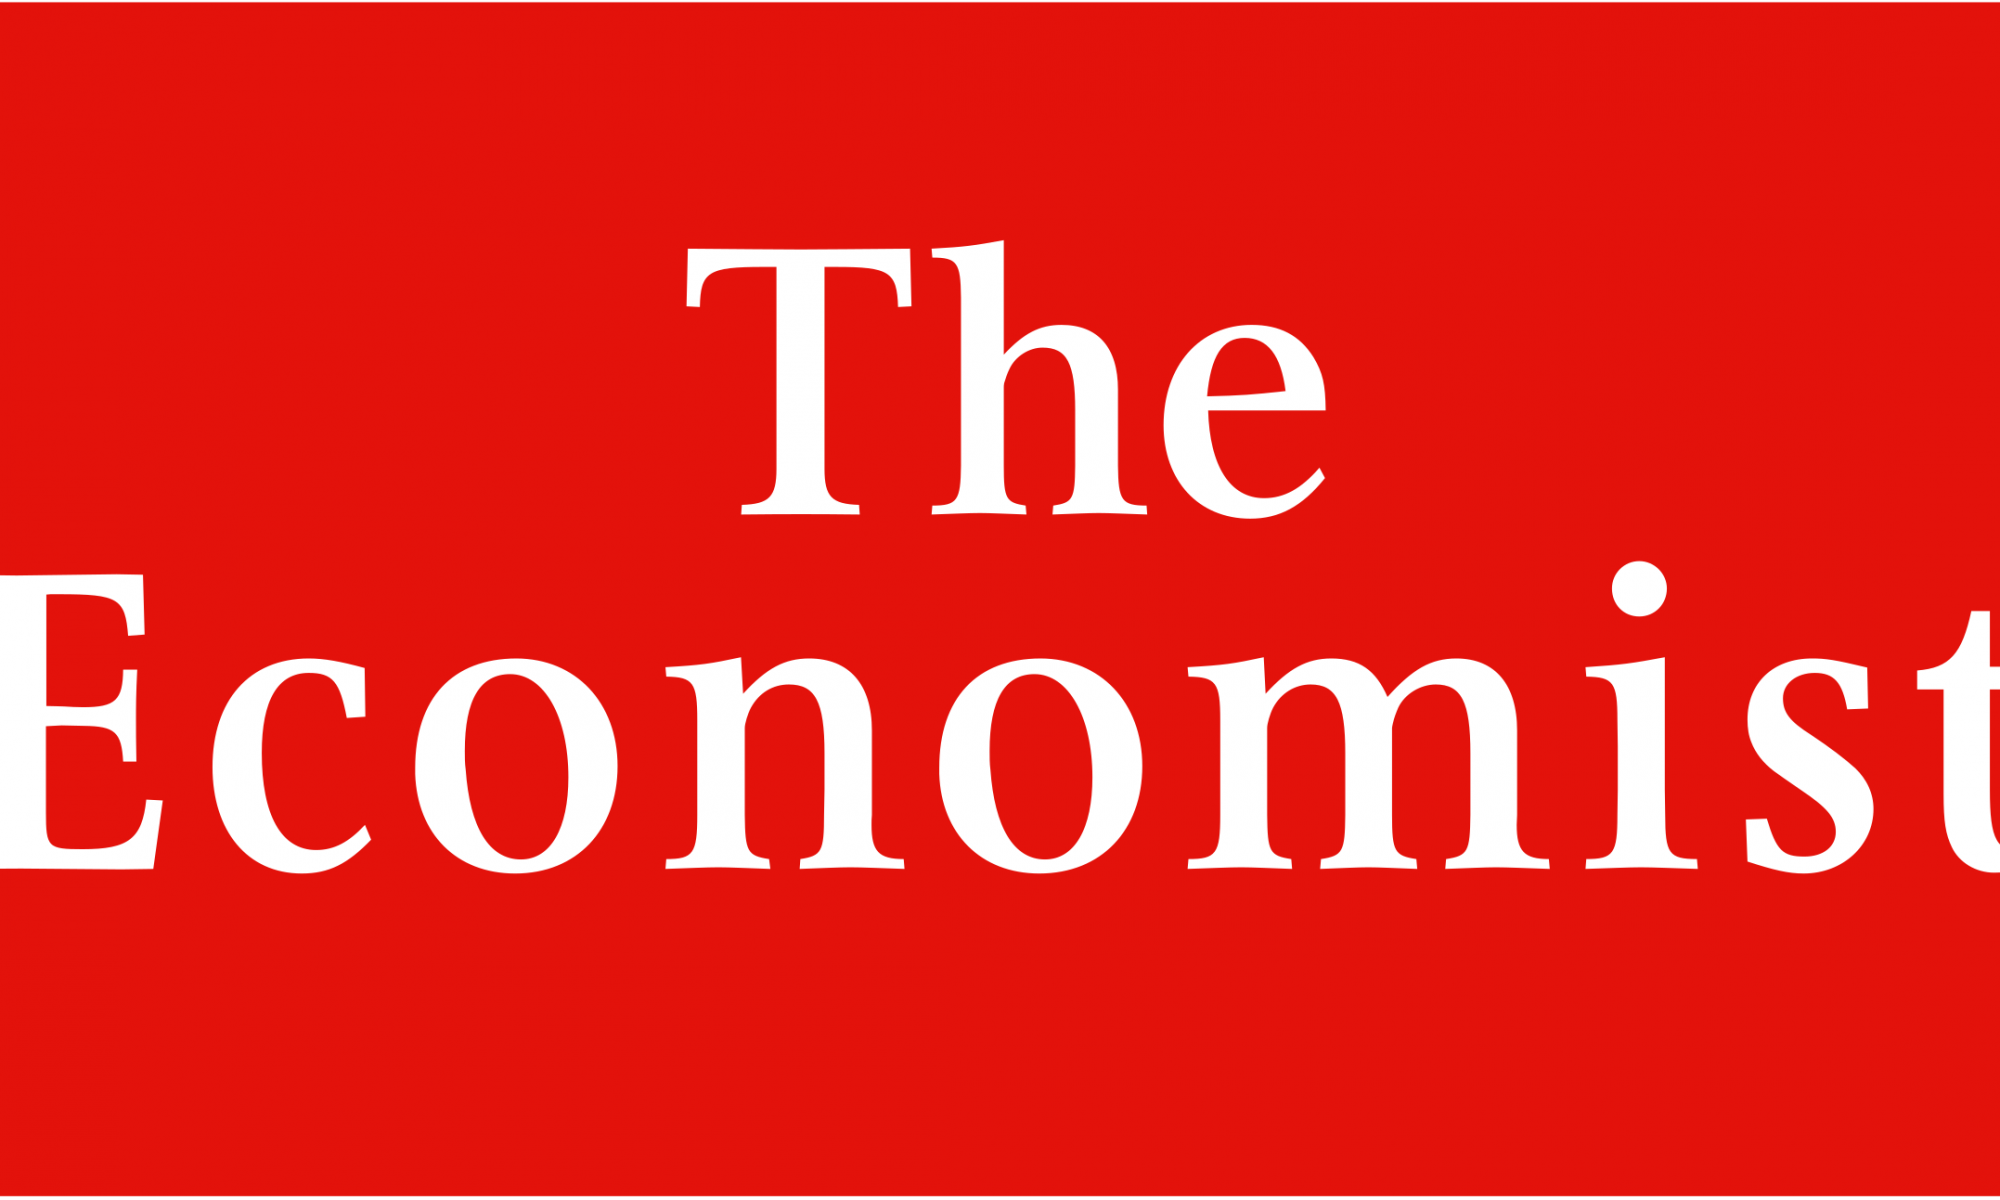 The Economist Profile of the Midwest Highlights Research Park's Focus on Technology Commercialization 1 The Economist Profile of the Midwest Highlights Research Park's Focus on Technology Commercialization